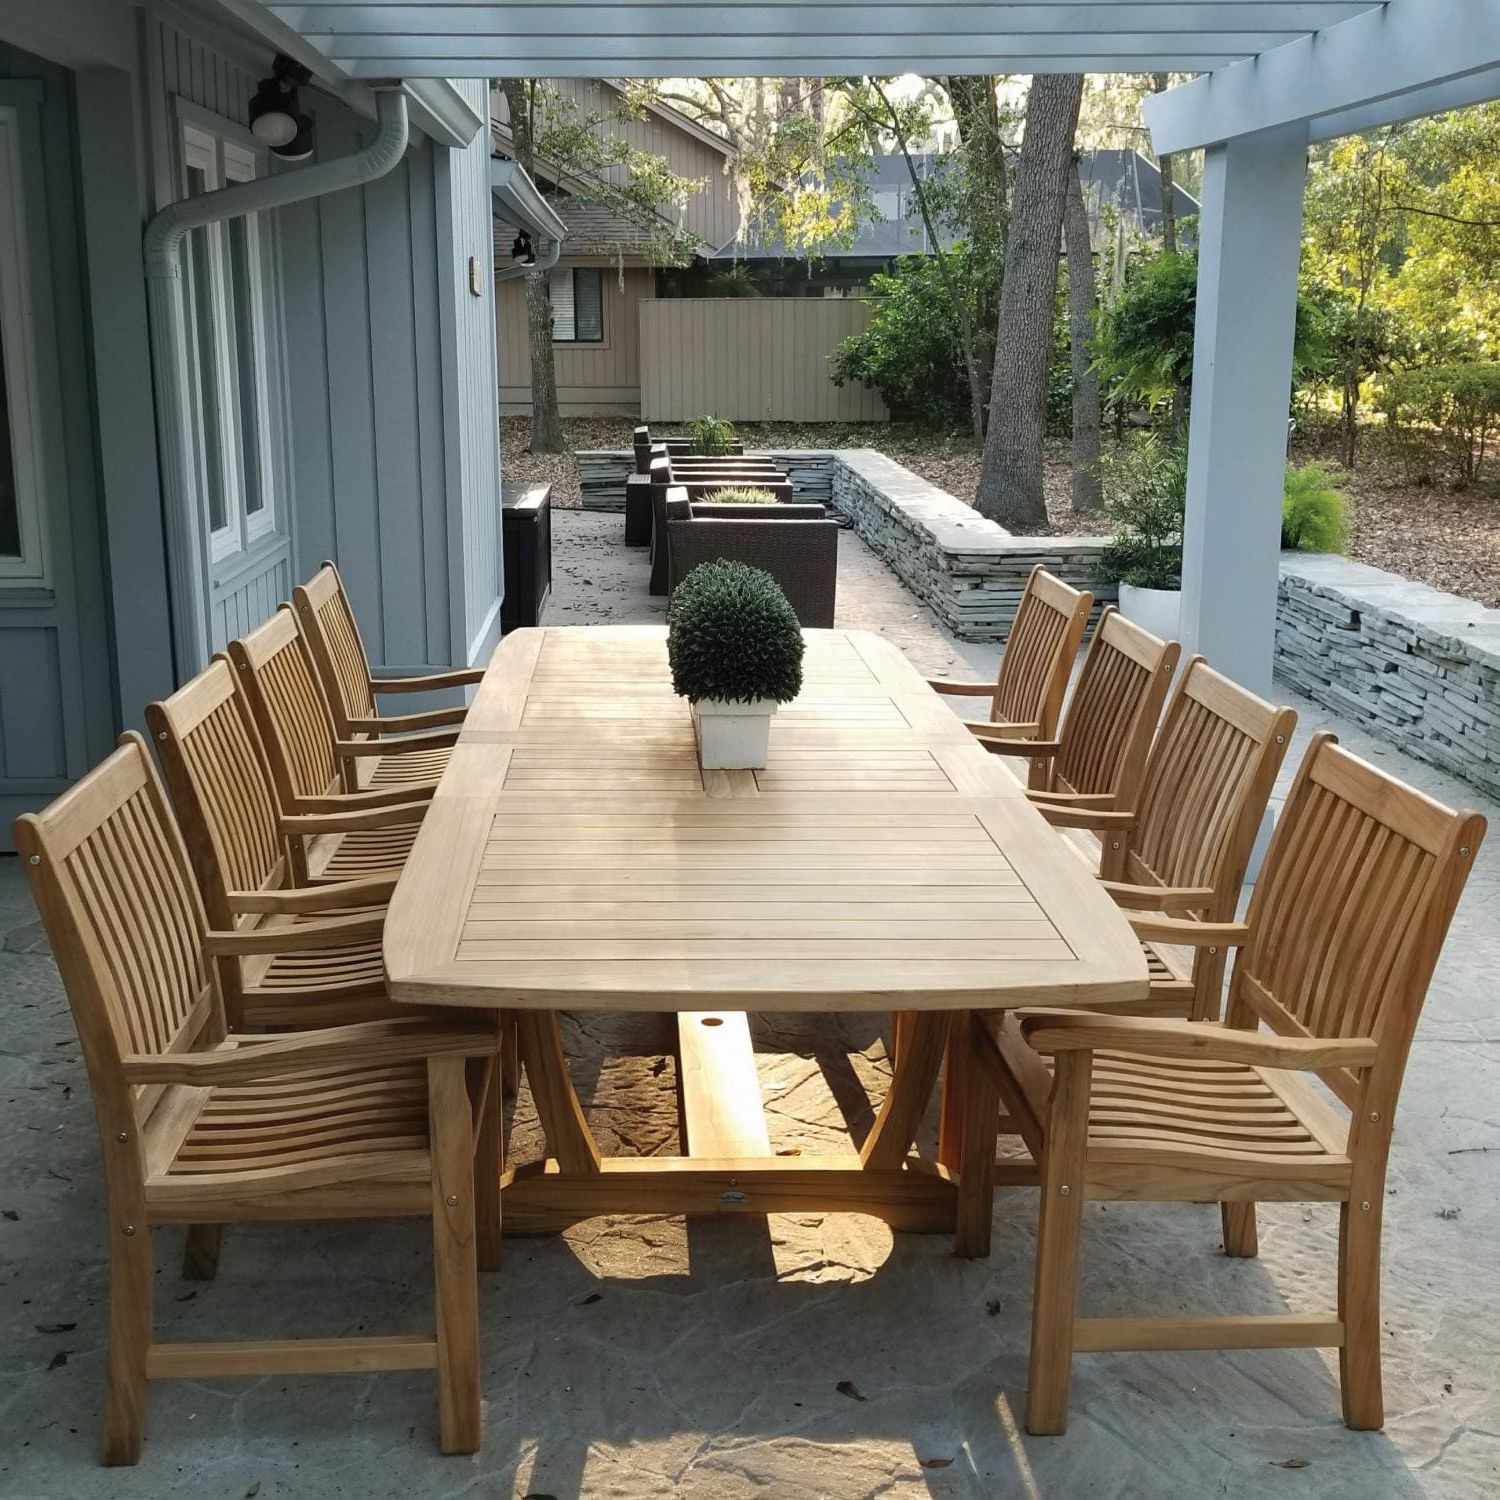 Compass 9 Piece Teak Patio Dining Set W/ 84 X 43 Inch Rectangular In Well Known Teak Wood Rectangular Patio Dining Sets (View 14 of 15)